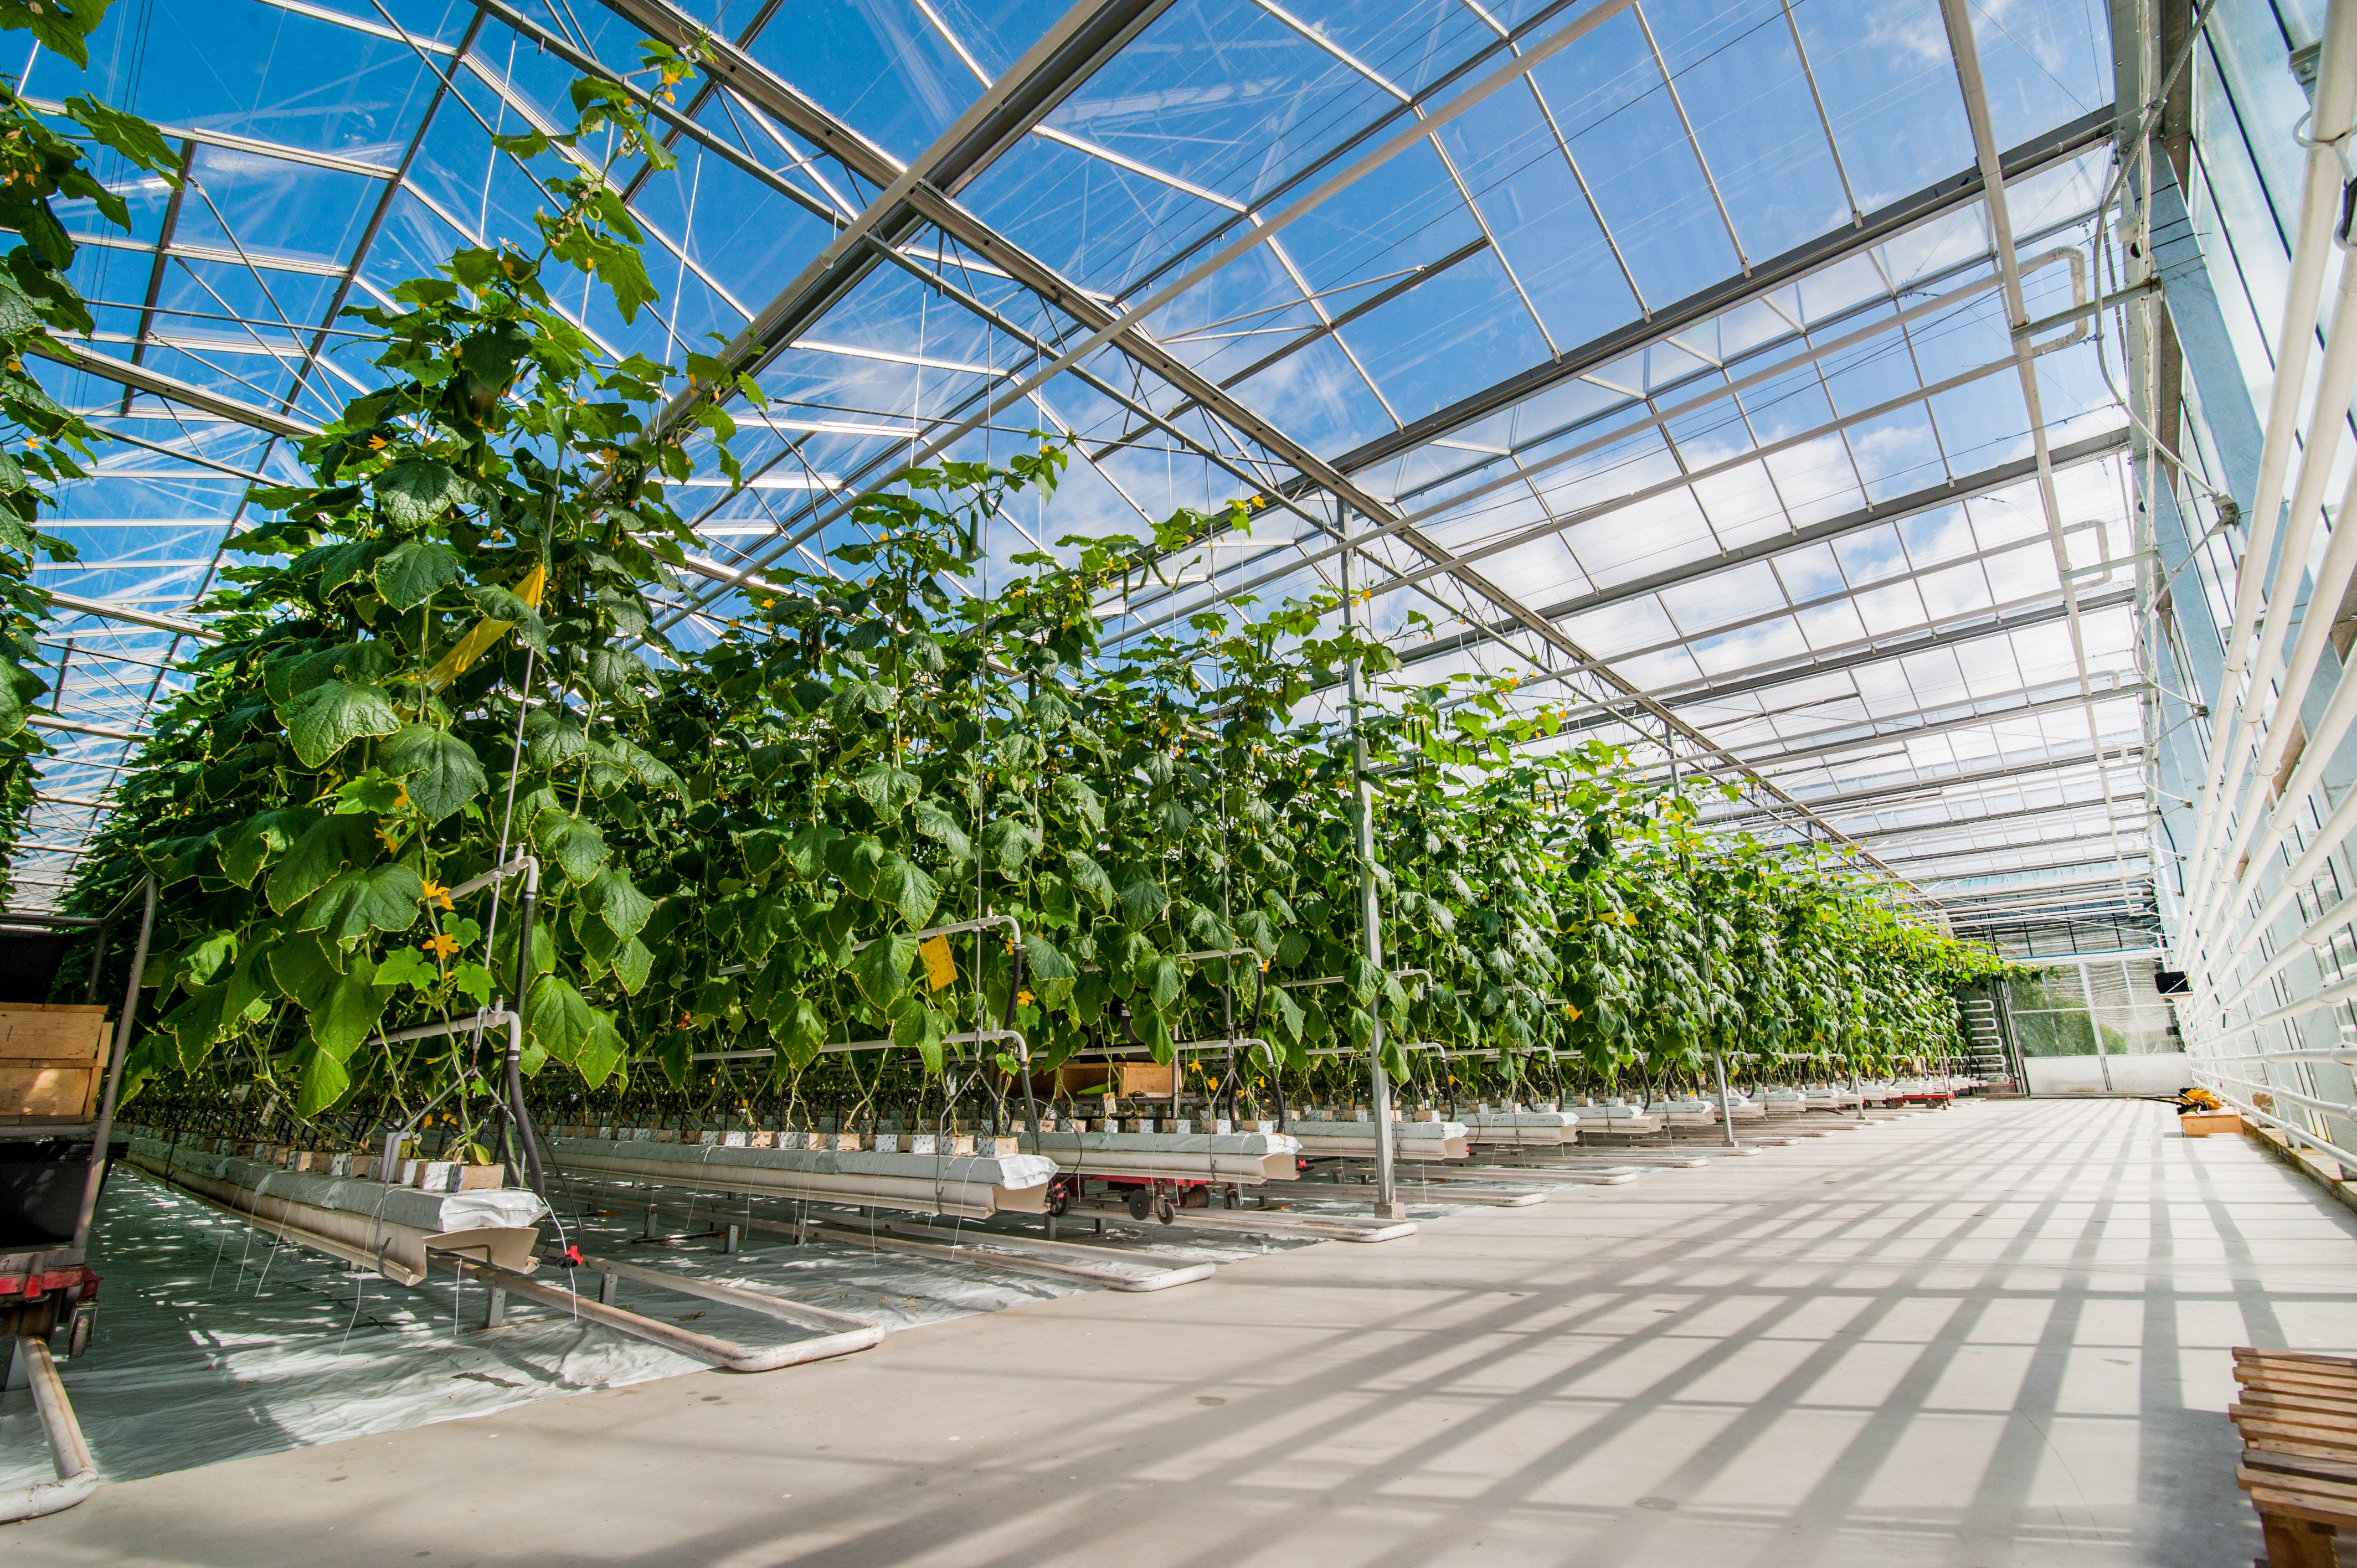 Seeking sustainable, cost-effective solutions to reduce the humidity of cooling air inside greenhouses in Qatar